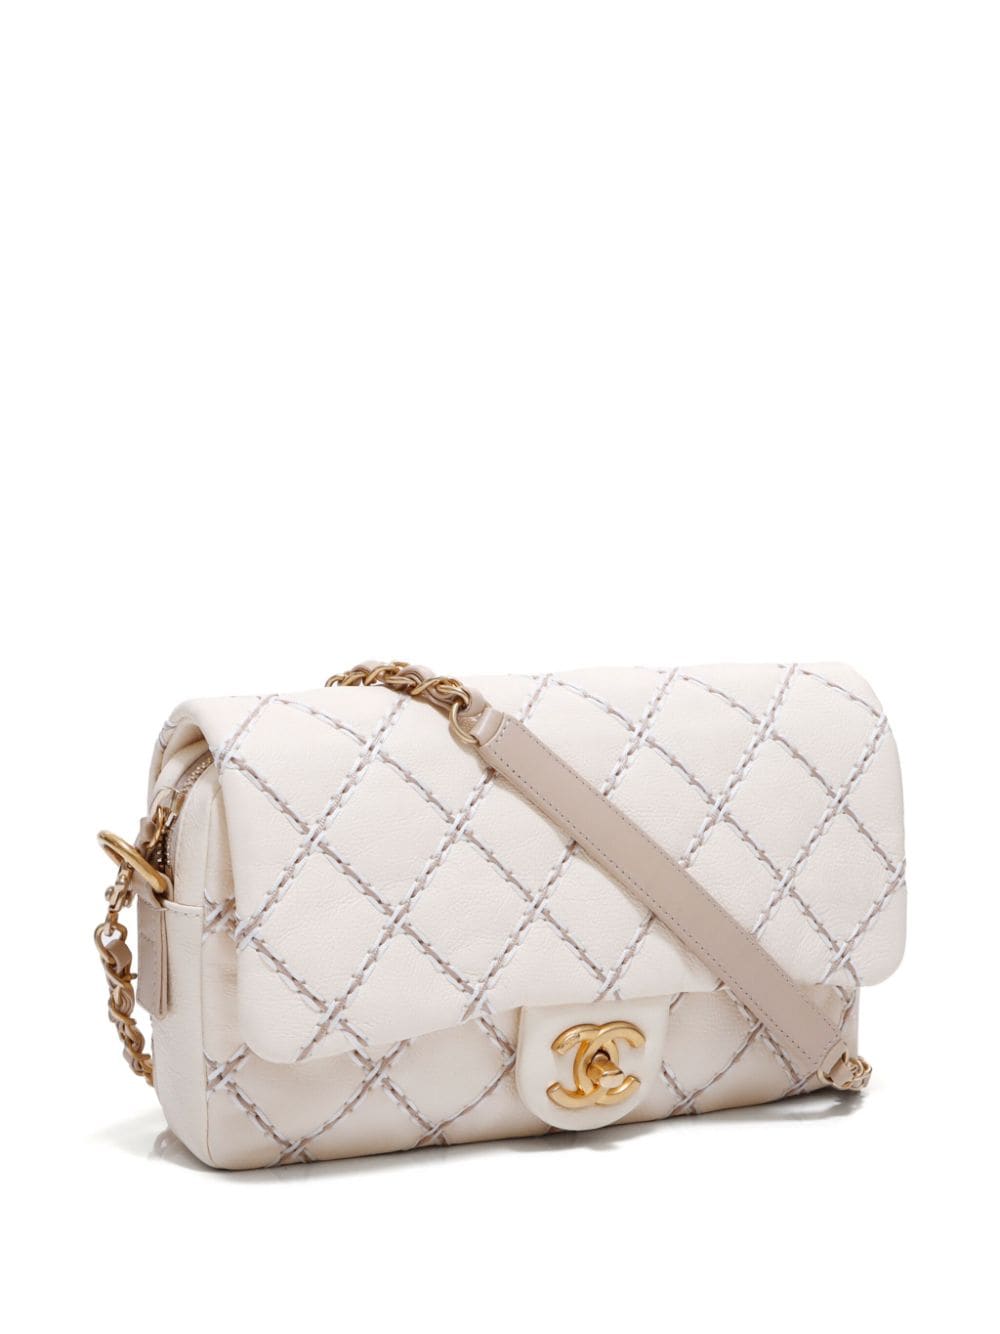 Pre-owned Chanel 2014 Cc Turn-lock Shoulder Bag In Neutrals